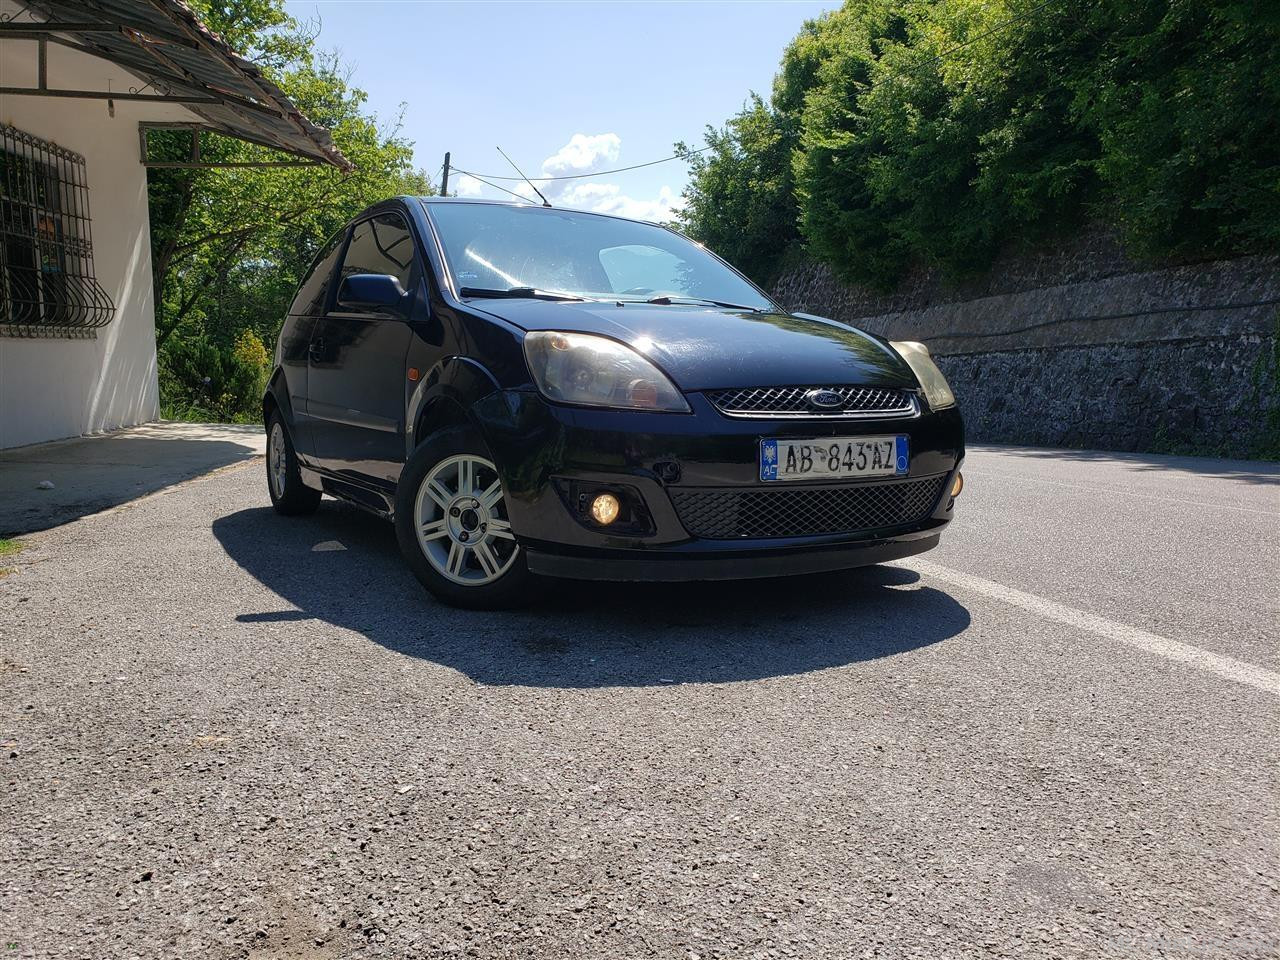 Shes ford fiesta 2006 1.4 nafte